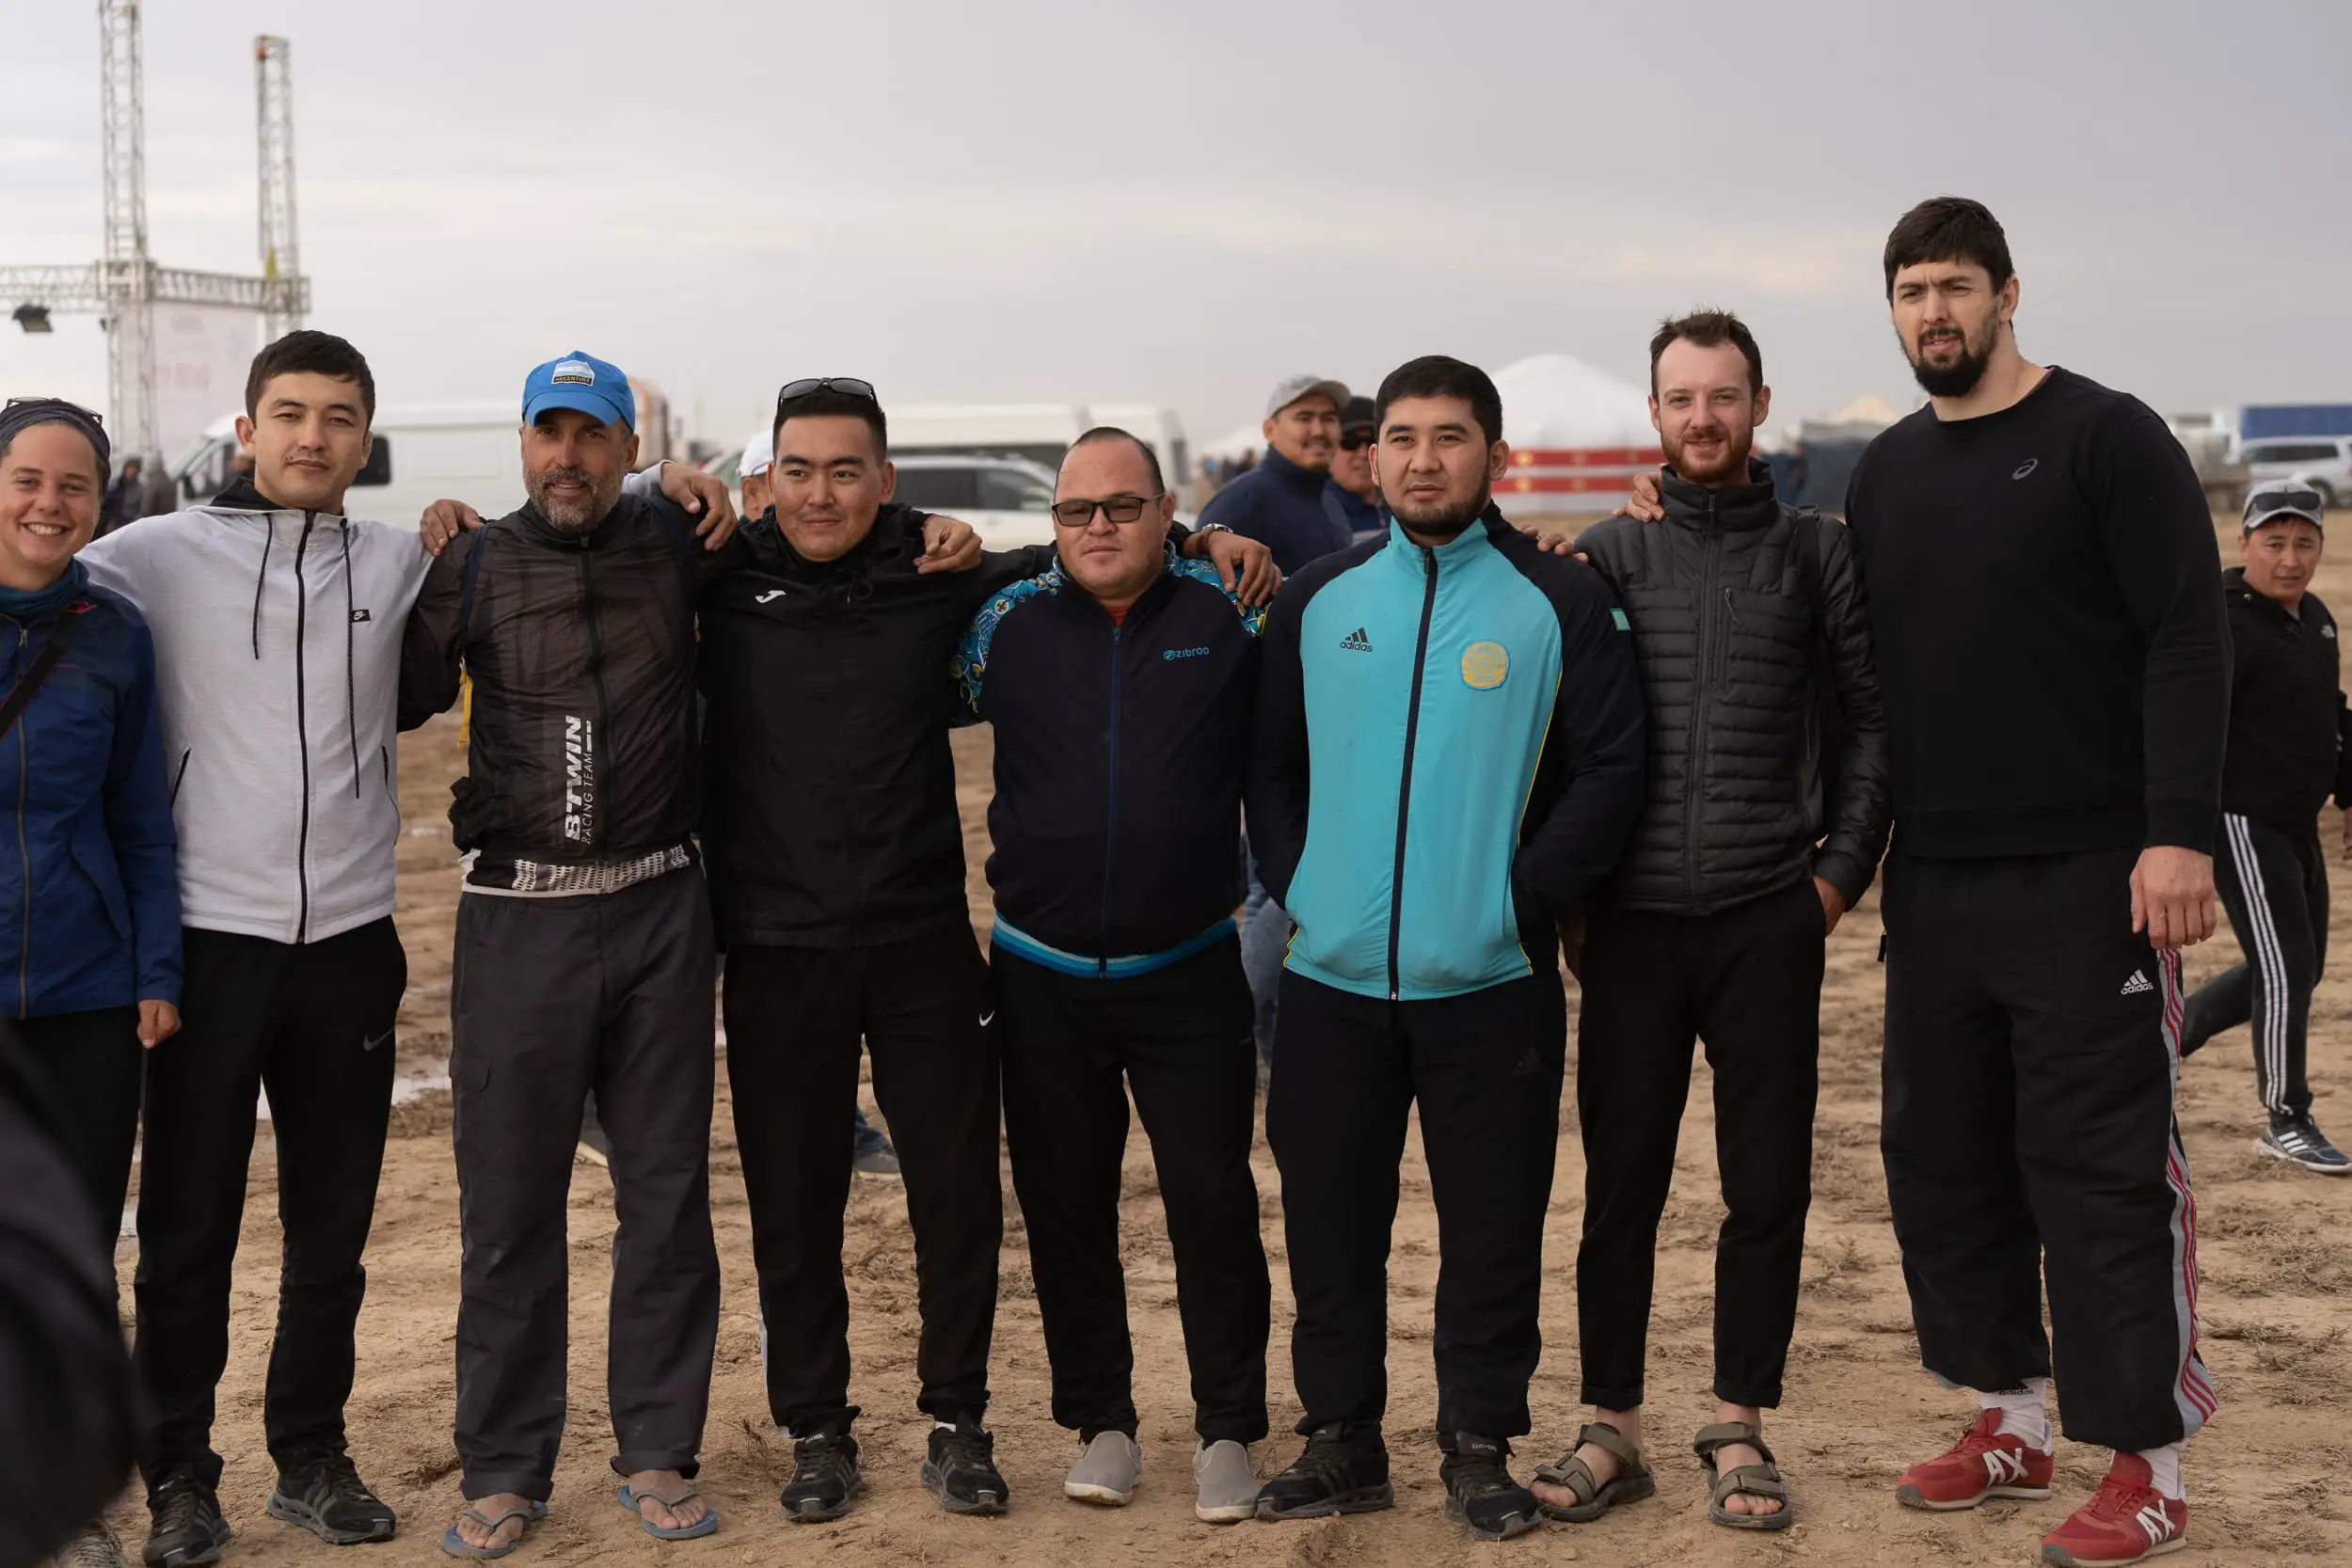 group picture in Kazakhstan